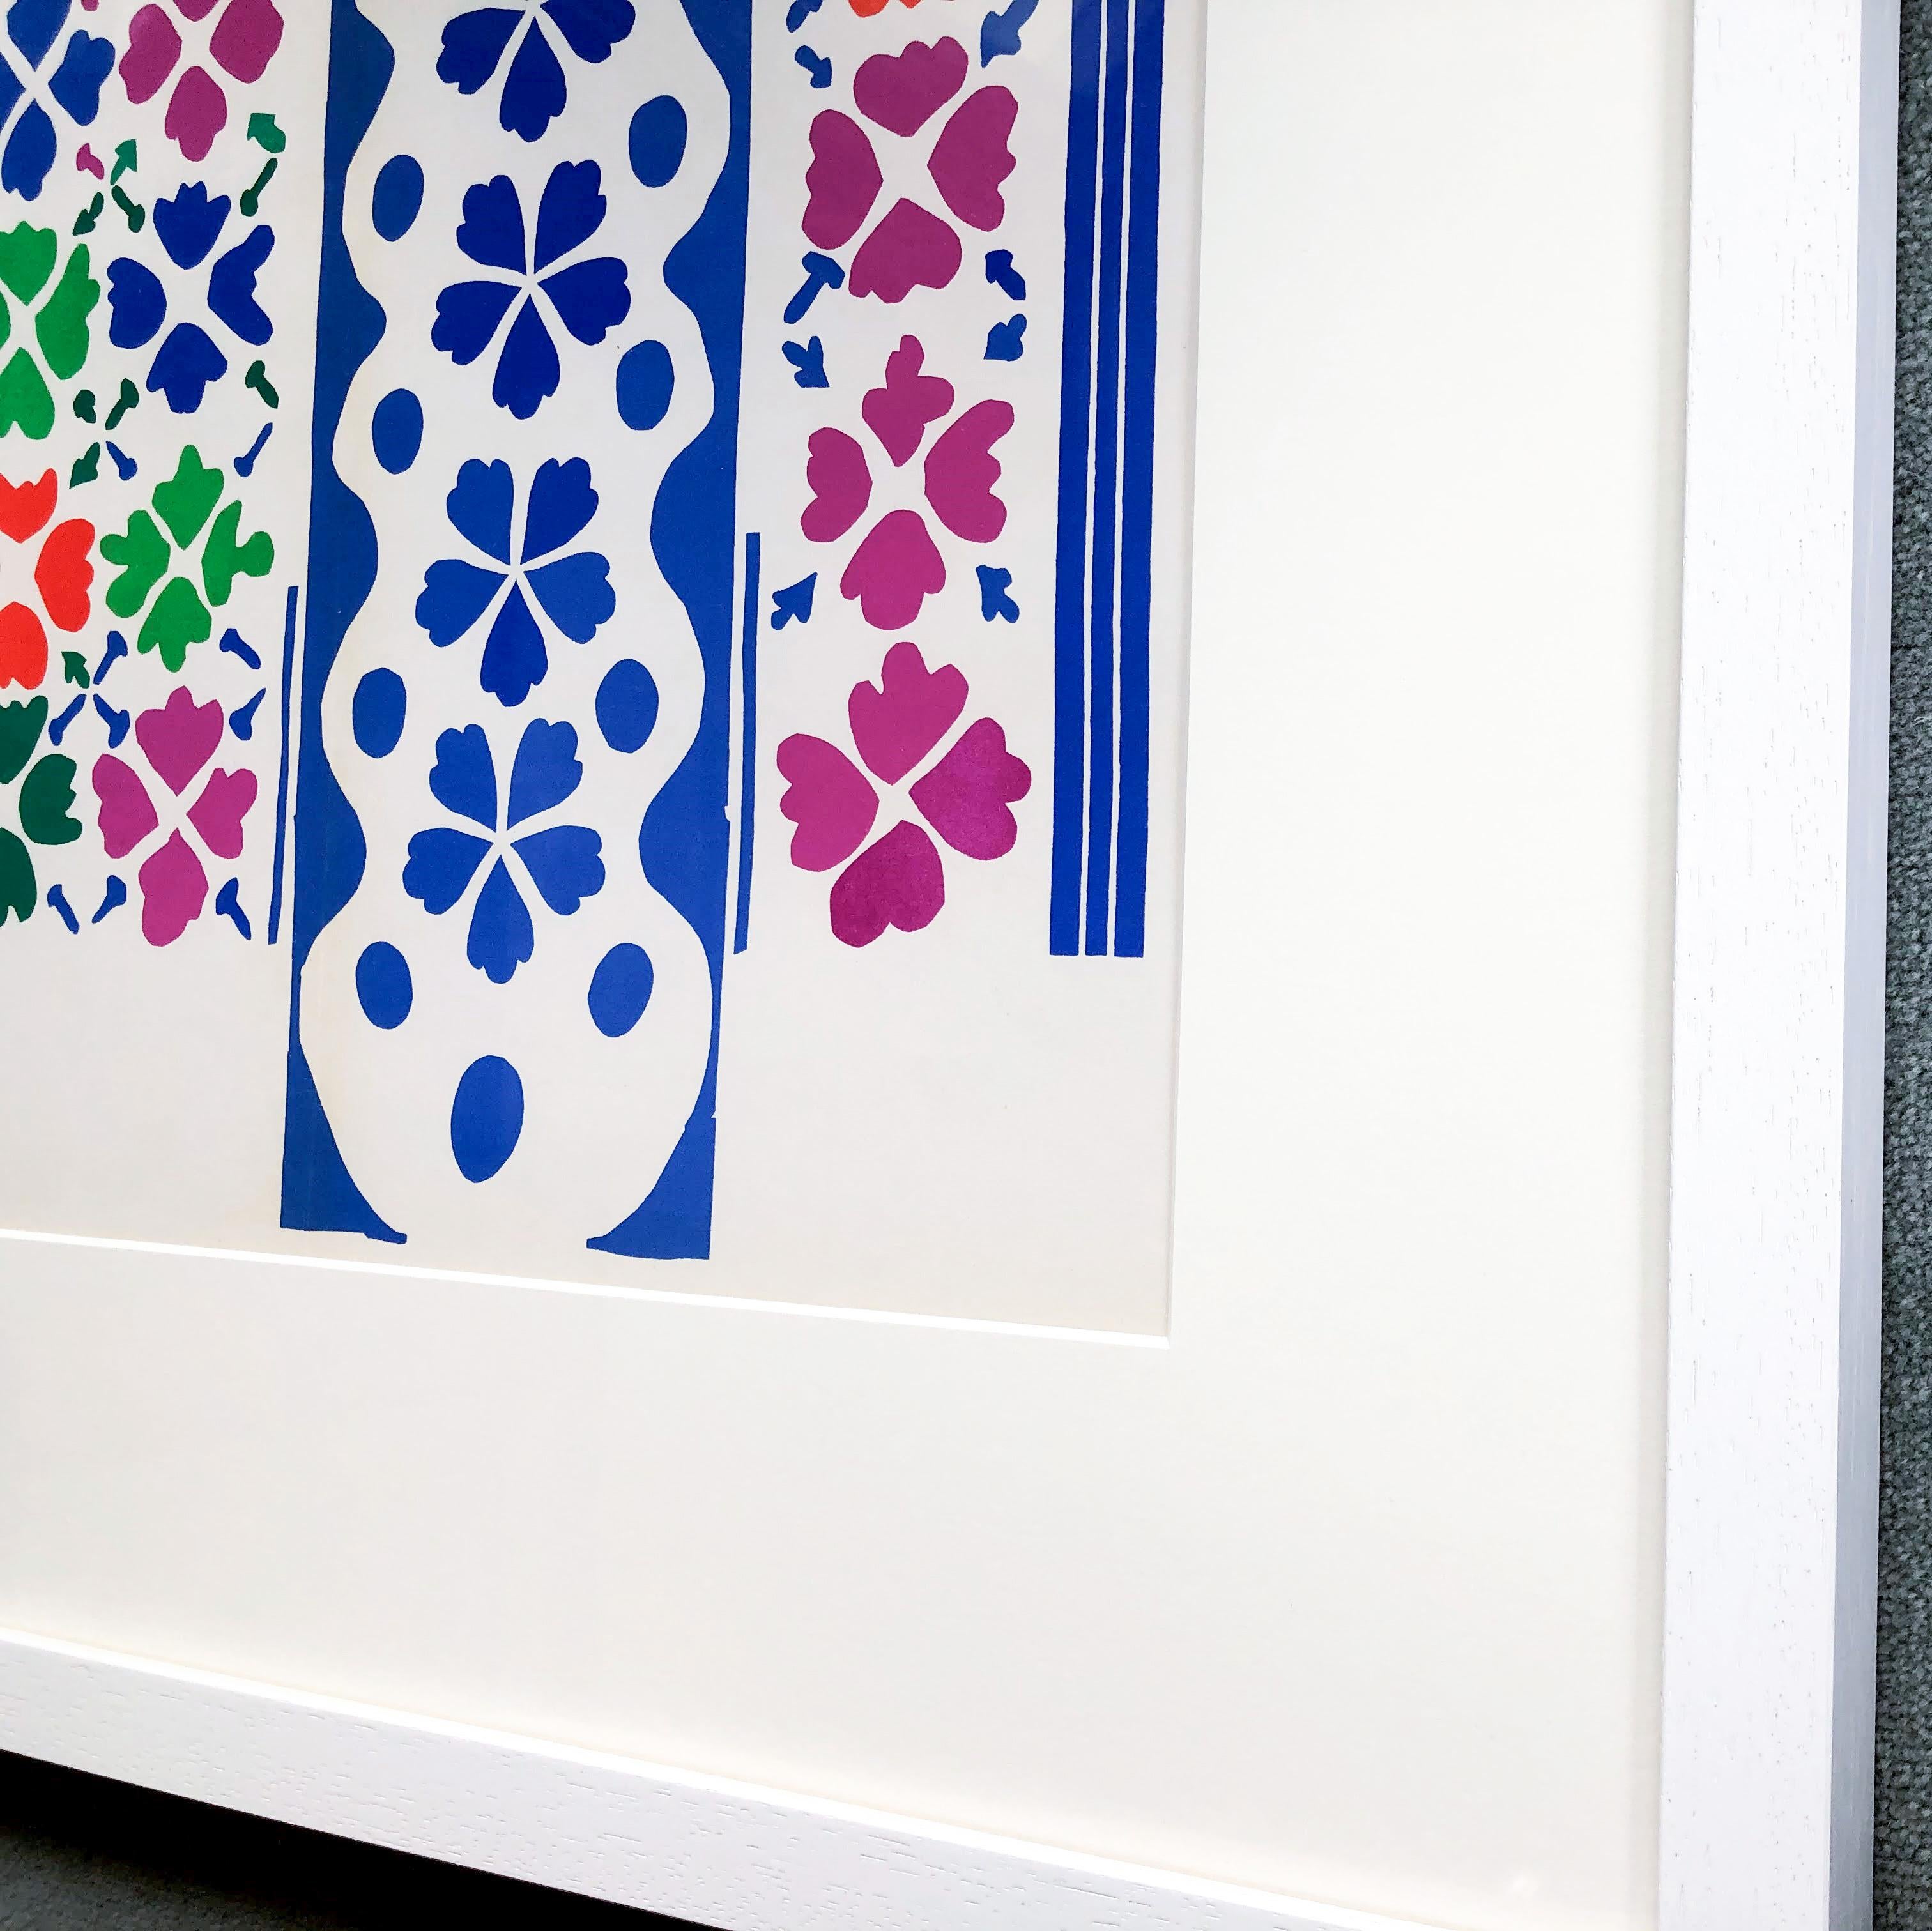 matisse’s cut-outs